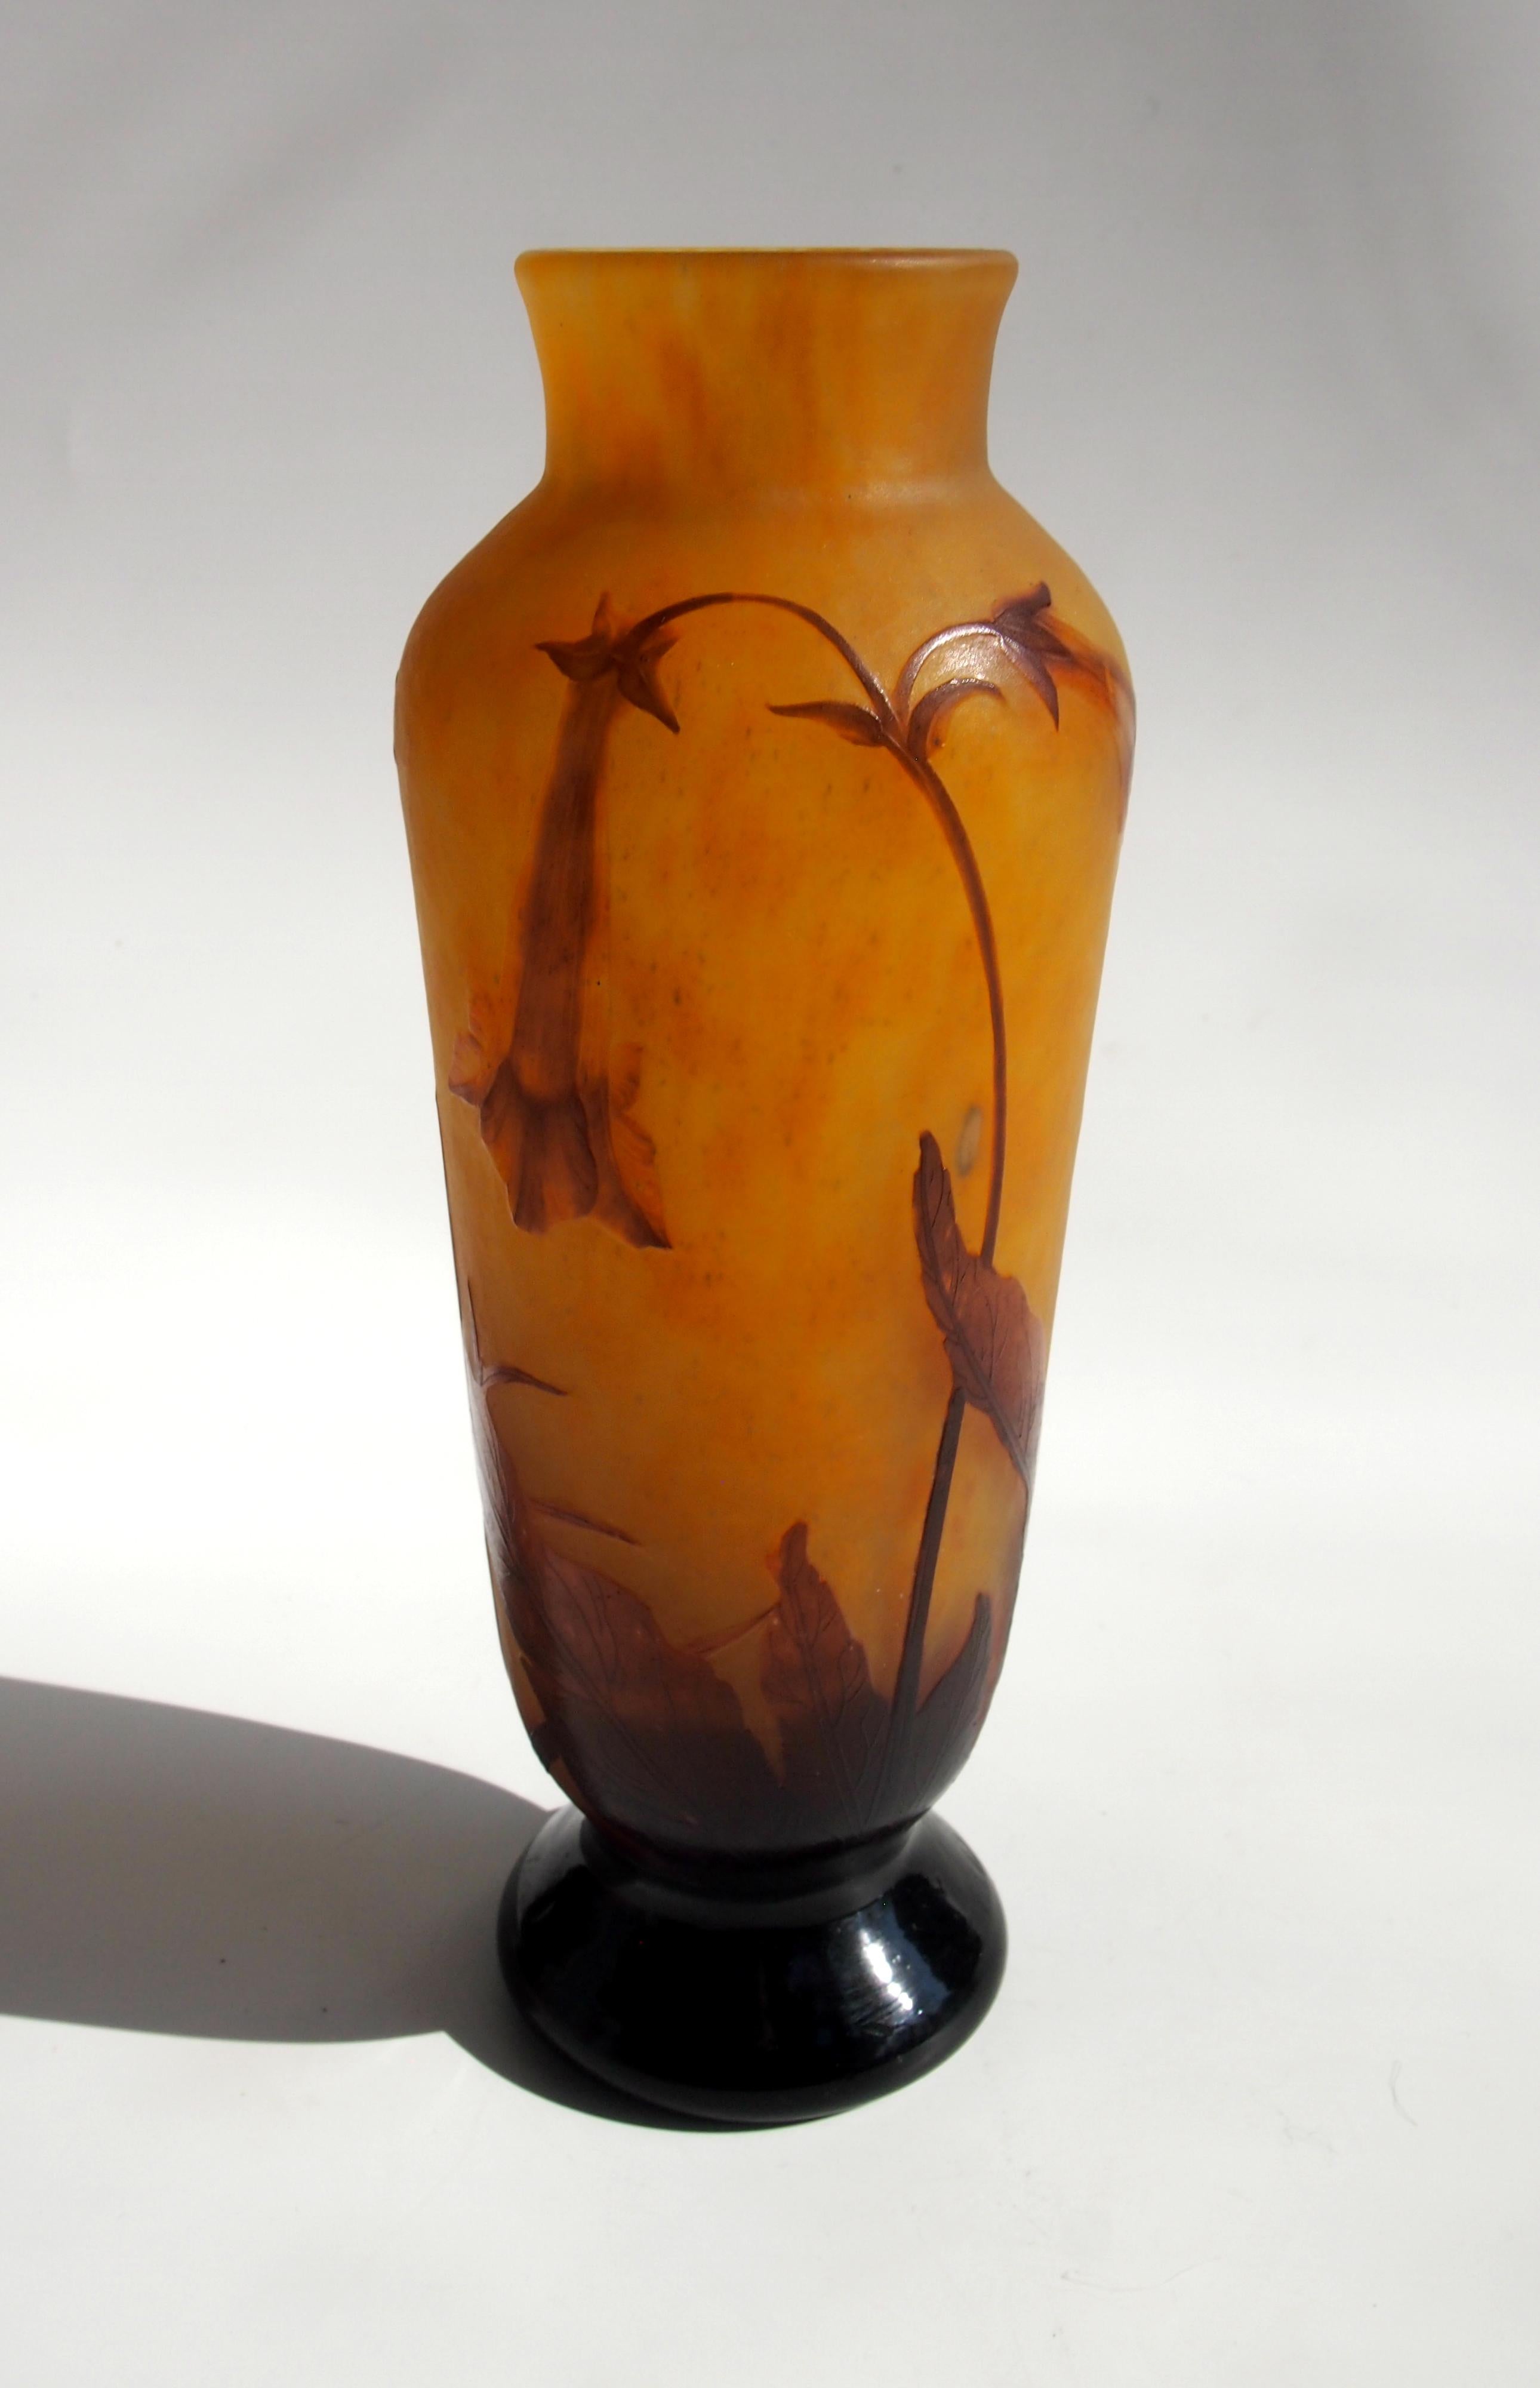 French Art Nouveau Daum Cameo and Wheel Carved Glass Nicotiana Vase c1900 In Good Condition For Sale In Worcester Park, GB